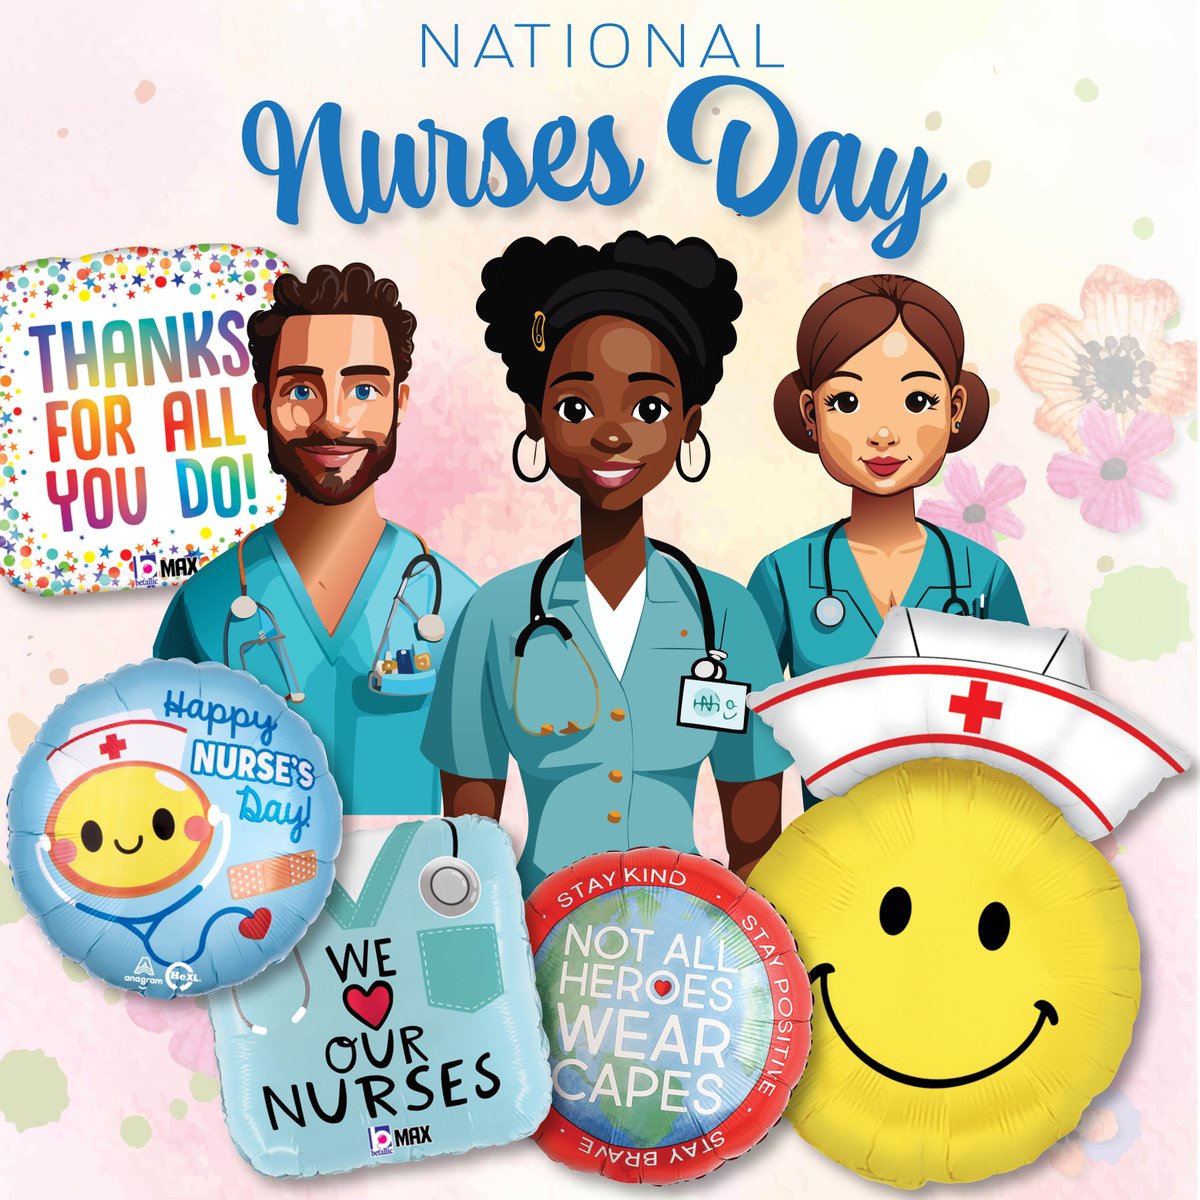 On May 6th, let's celebrate the incredible nurses who work tirelessly to keep us healthy. Show them some love with a balloon bouquet 🎈🎈🎈

#NationalNursesDay #ThankYouNurses #NurseAppreciation

balloons.com/search/nurse